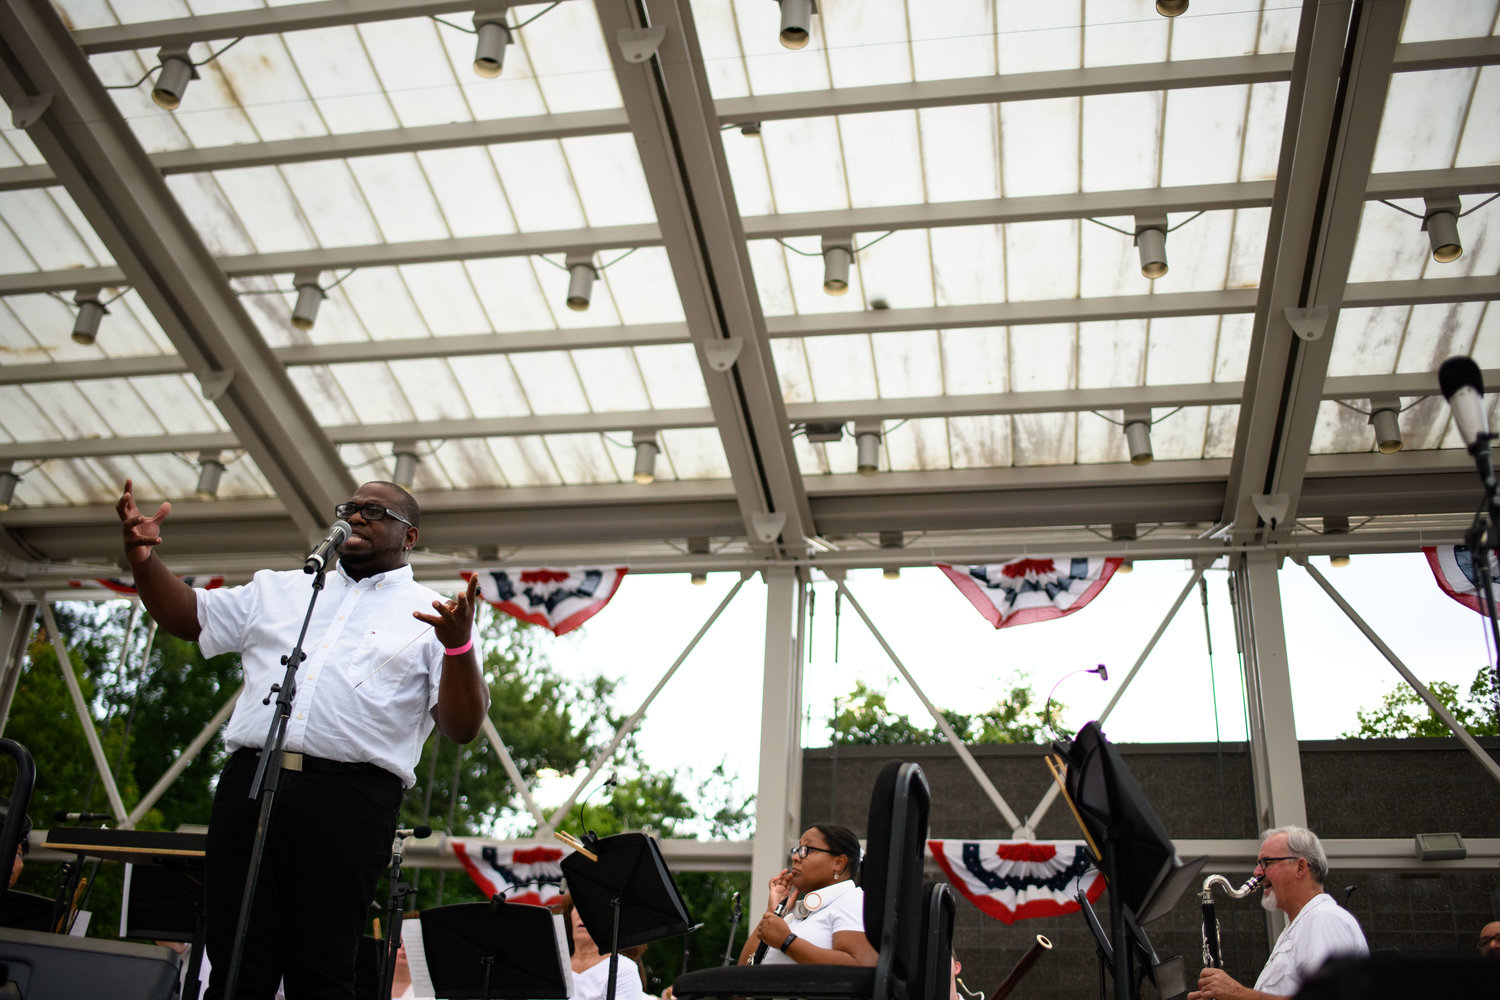 The conductor for the Fayetteville Symphony Orchestra speaks to the crowd as part of the Independence Day celebration at Festival Park on Monday.